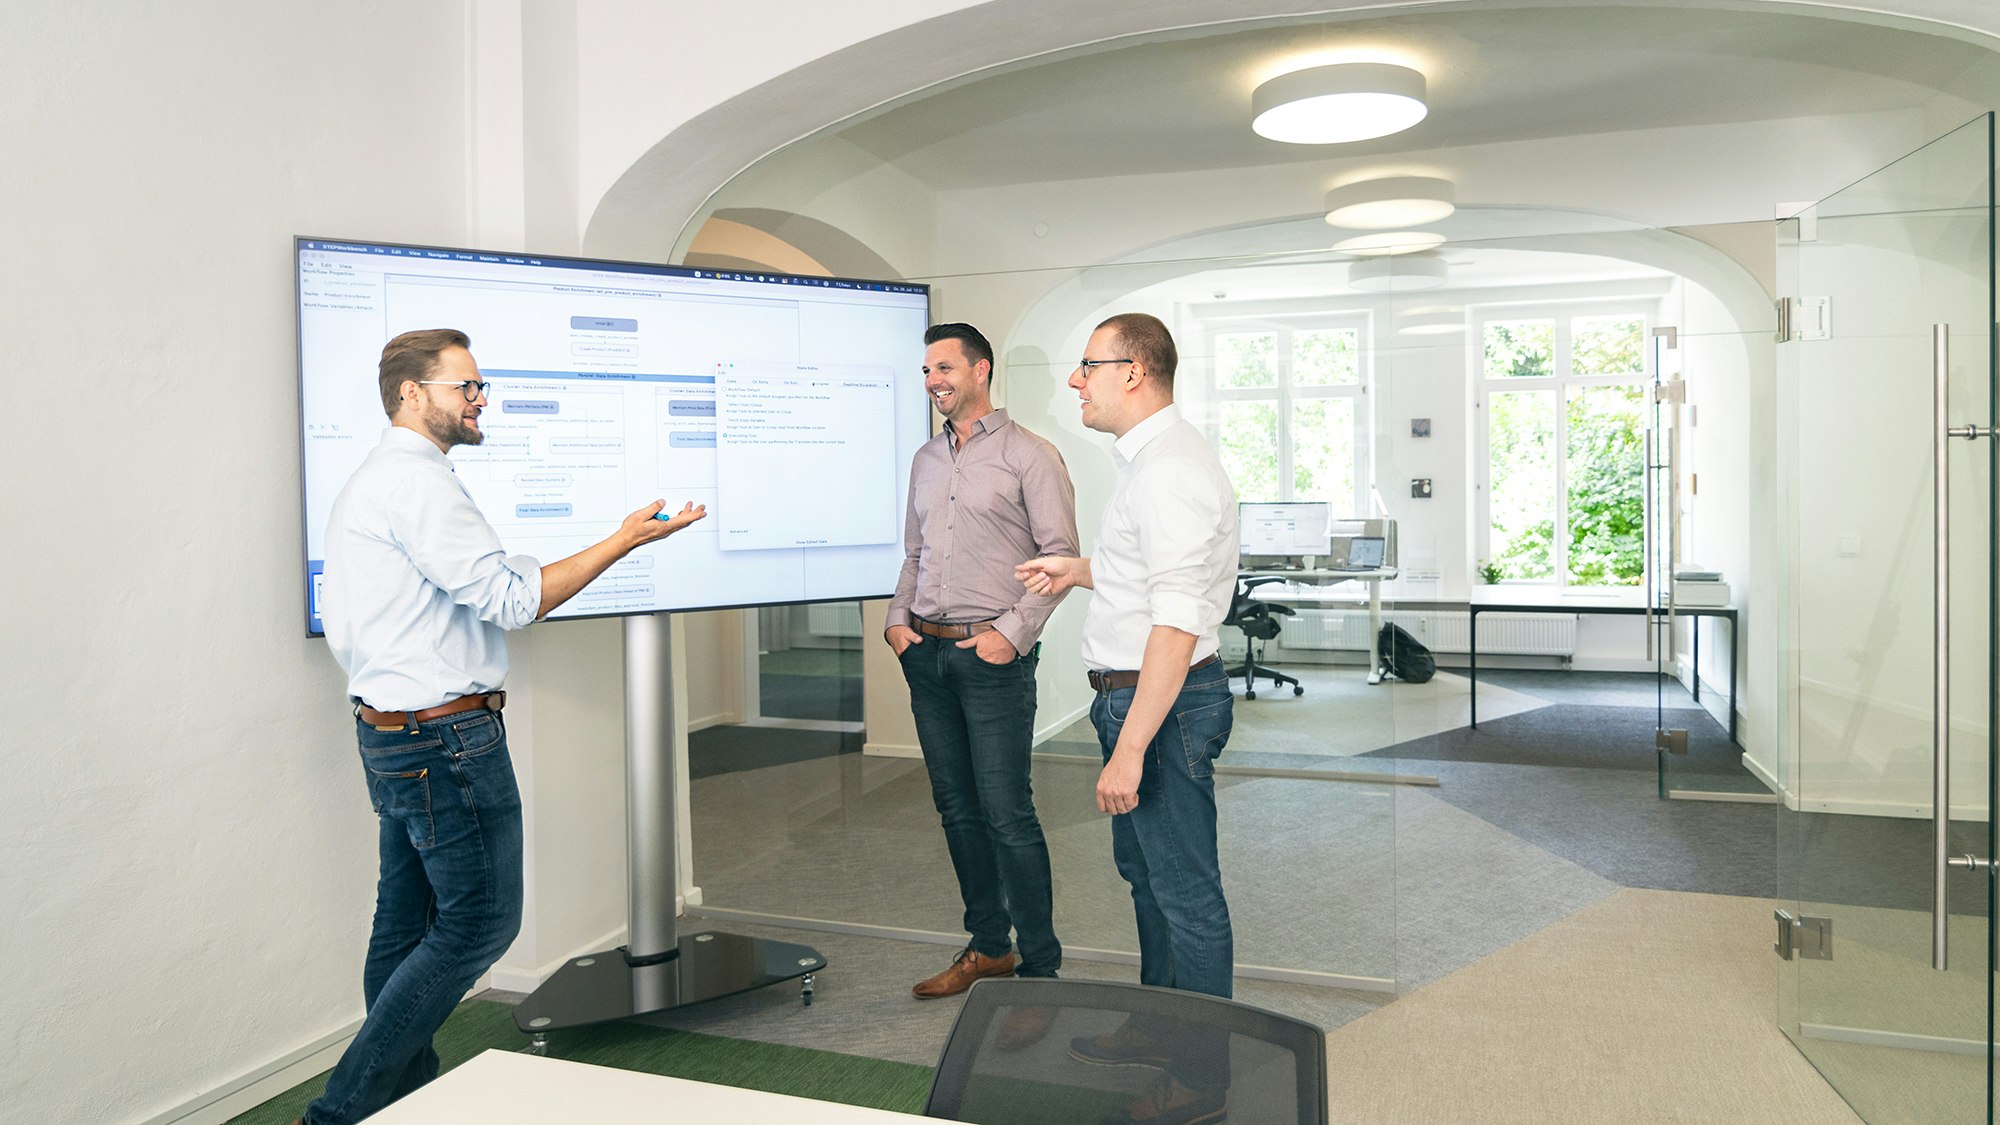 Three people discussing, standing around a large screen in an office setting